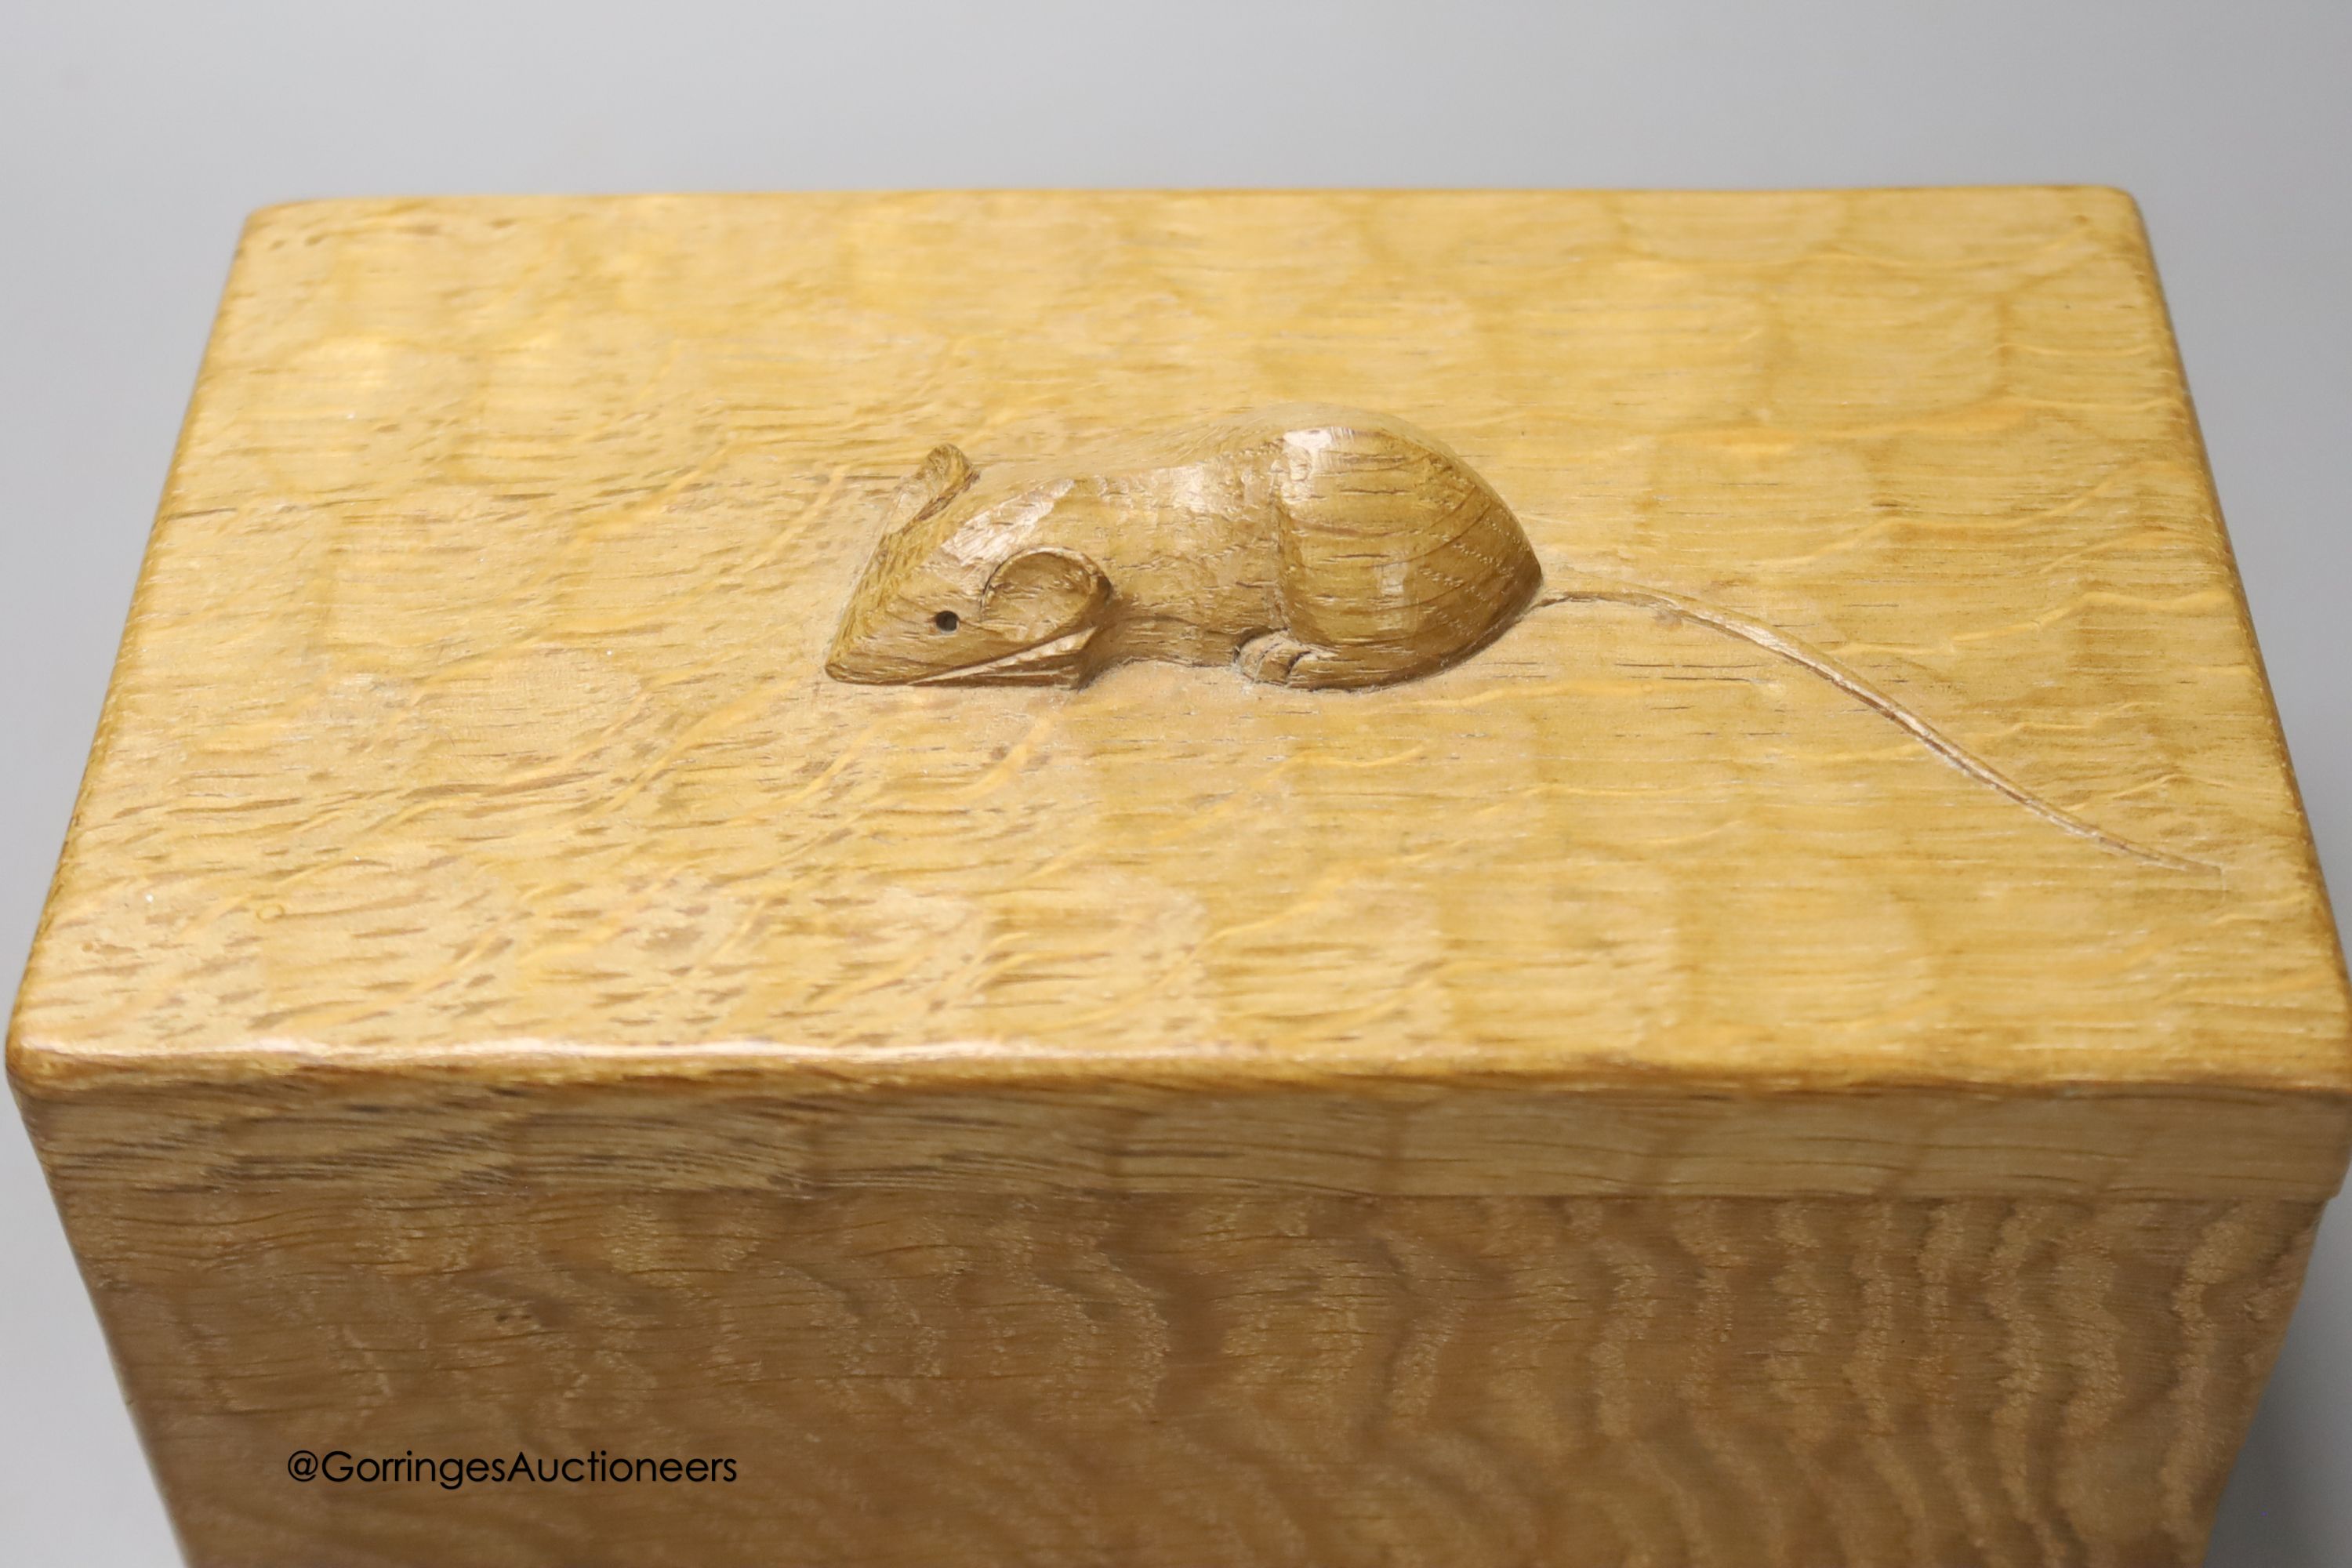 A Mouseman carved oak box and cover, 19cm